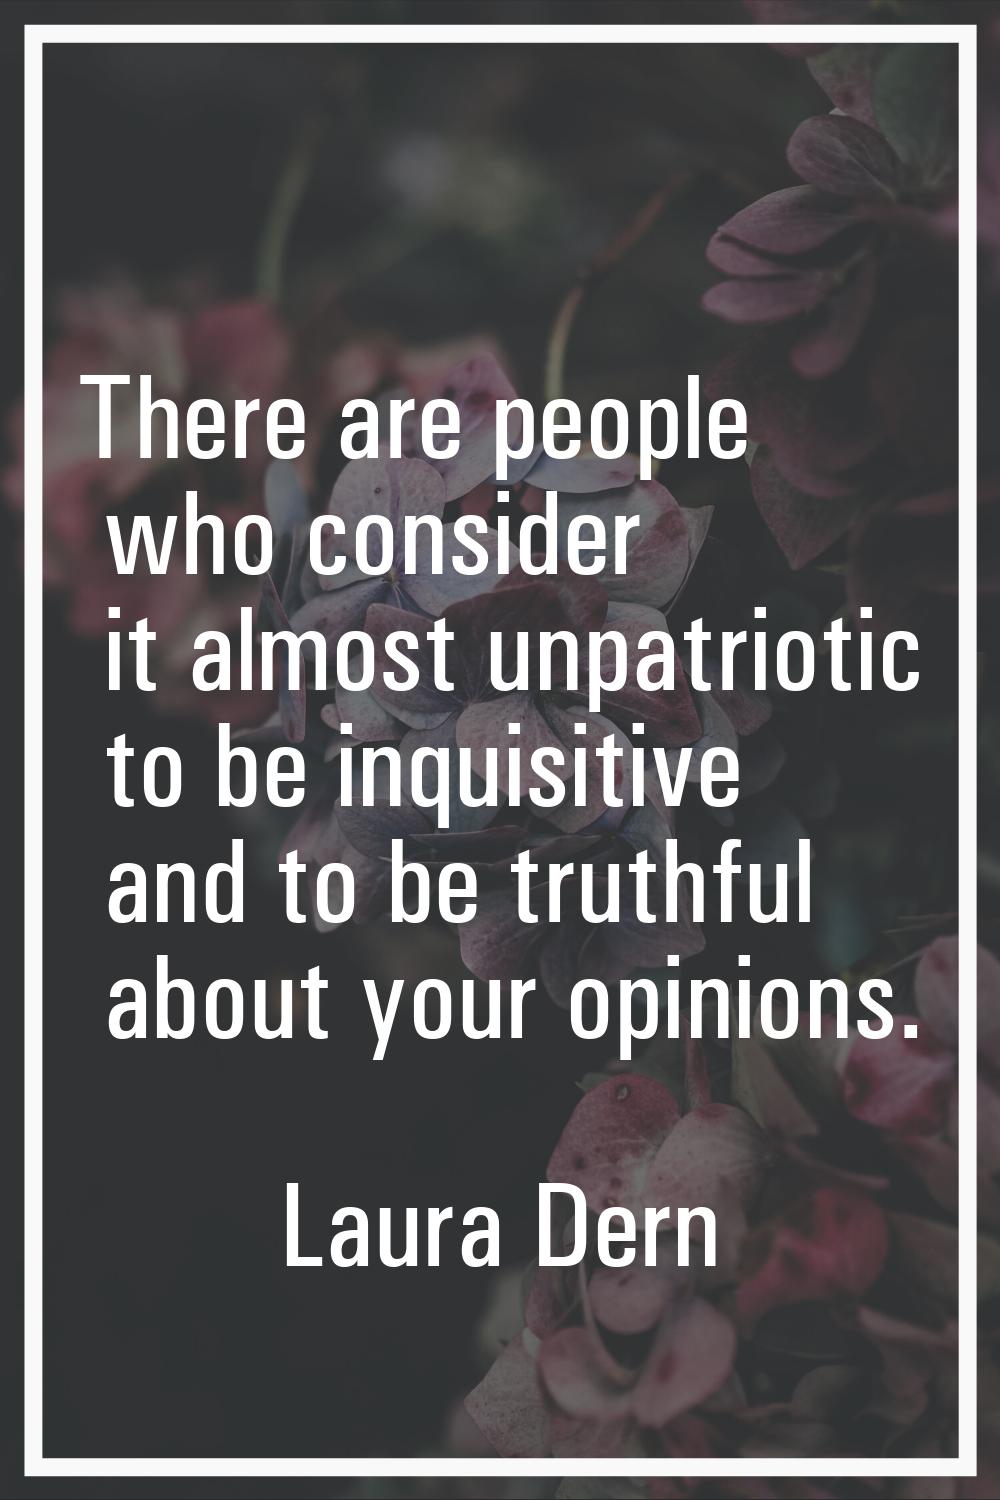 There are people who consider it almost unpatriotic to be inquisitive and to be truthful about your